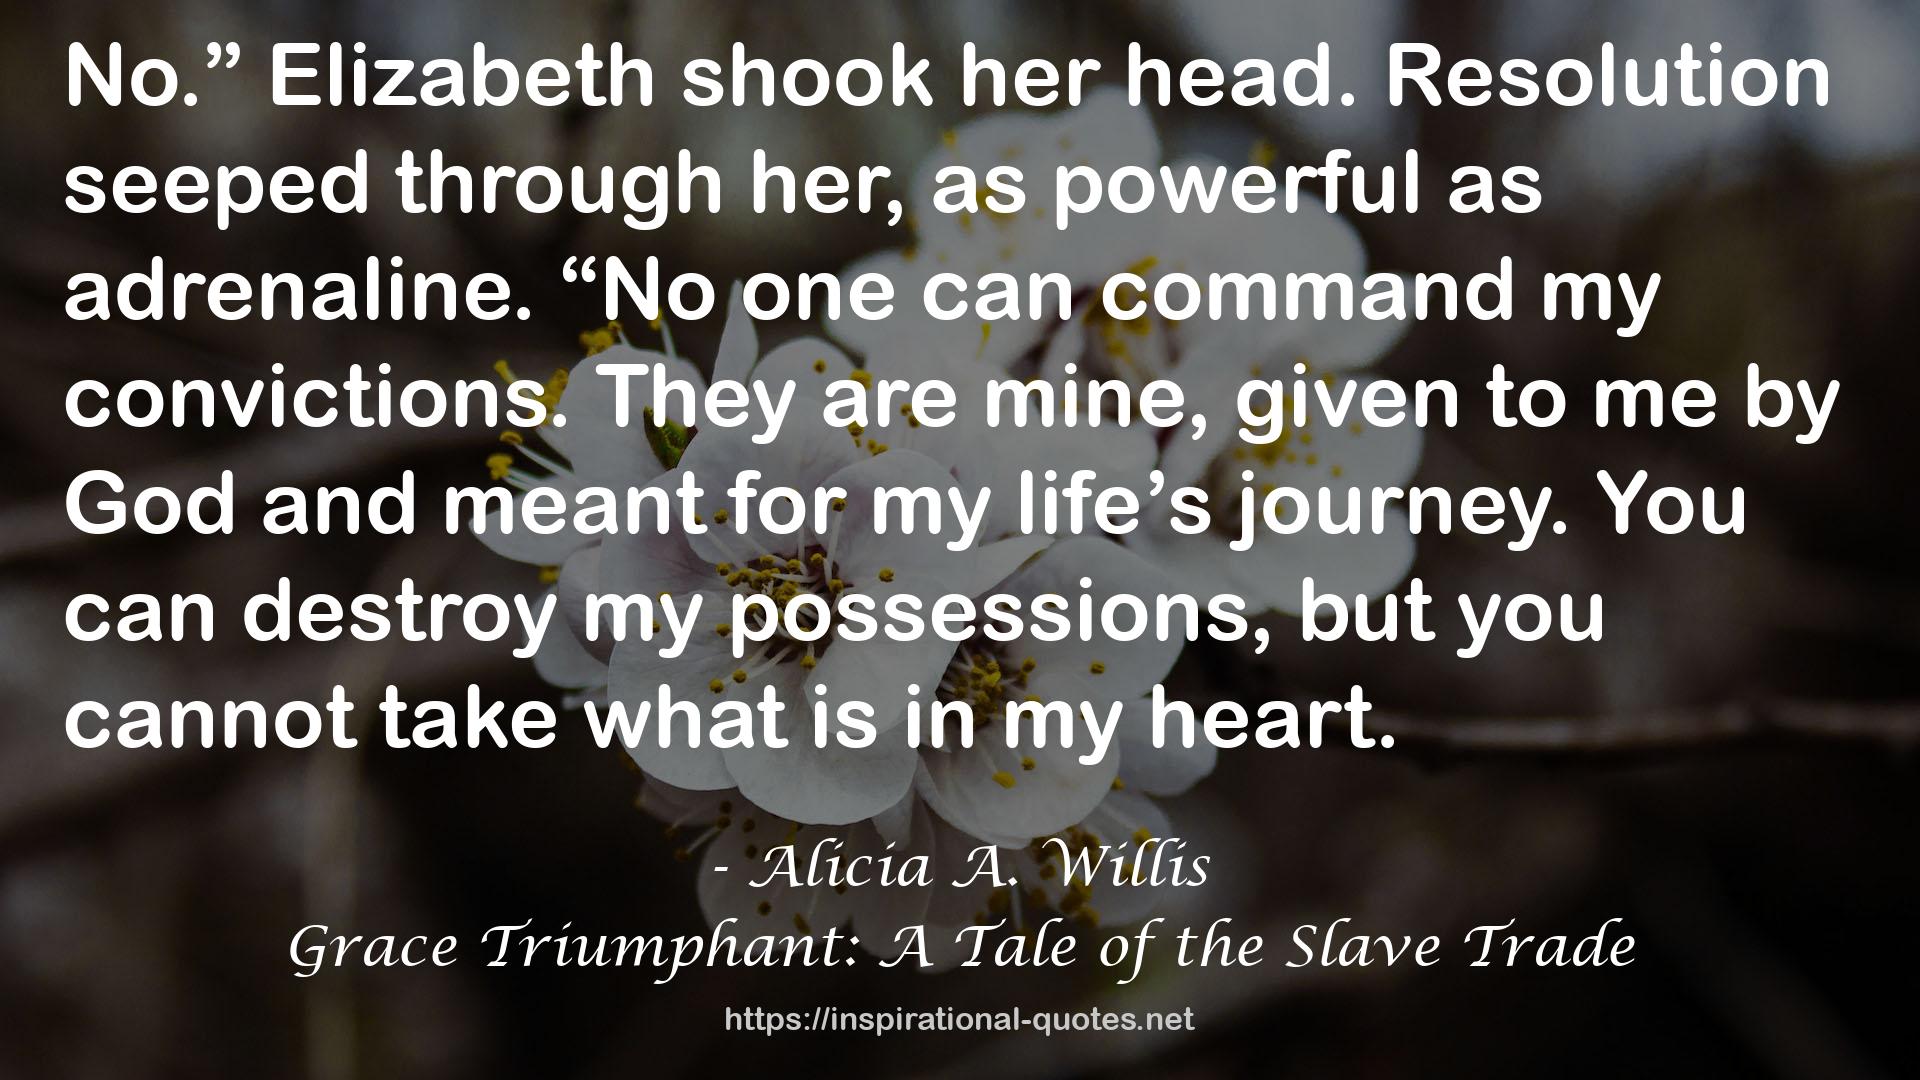 Grace Triumphant: A Tale of the Slave Trade QUOTES